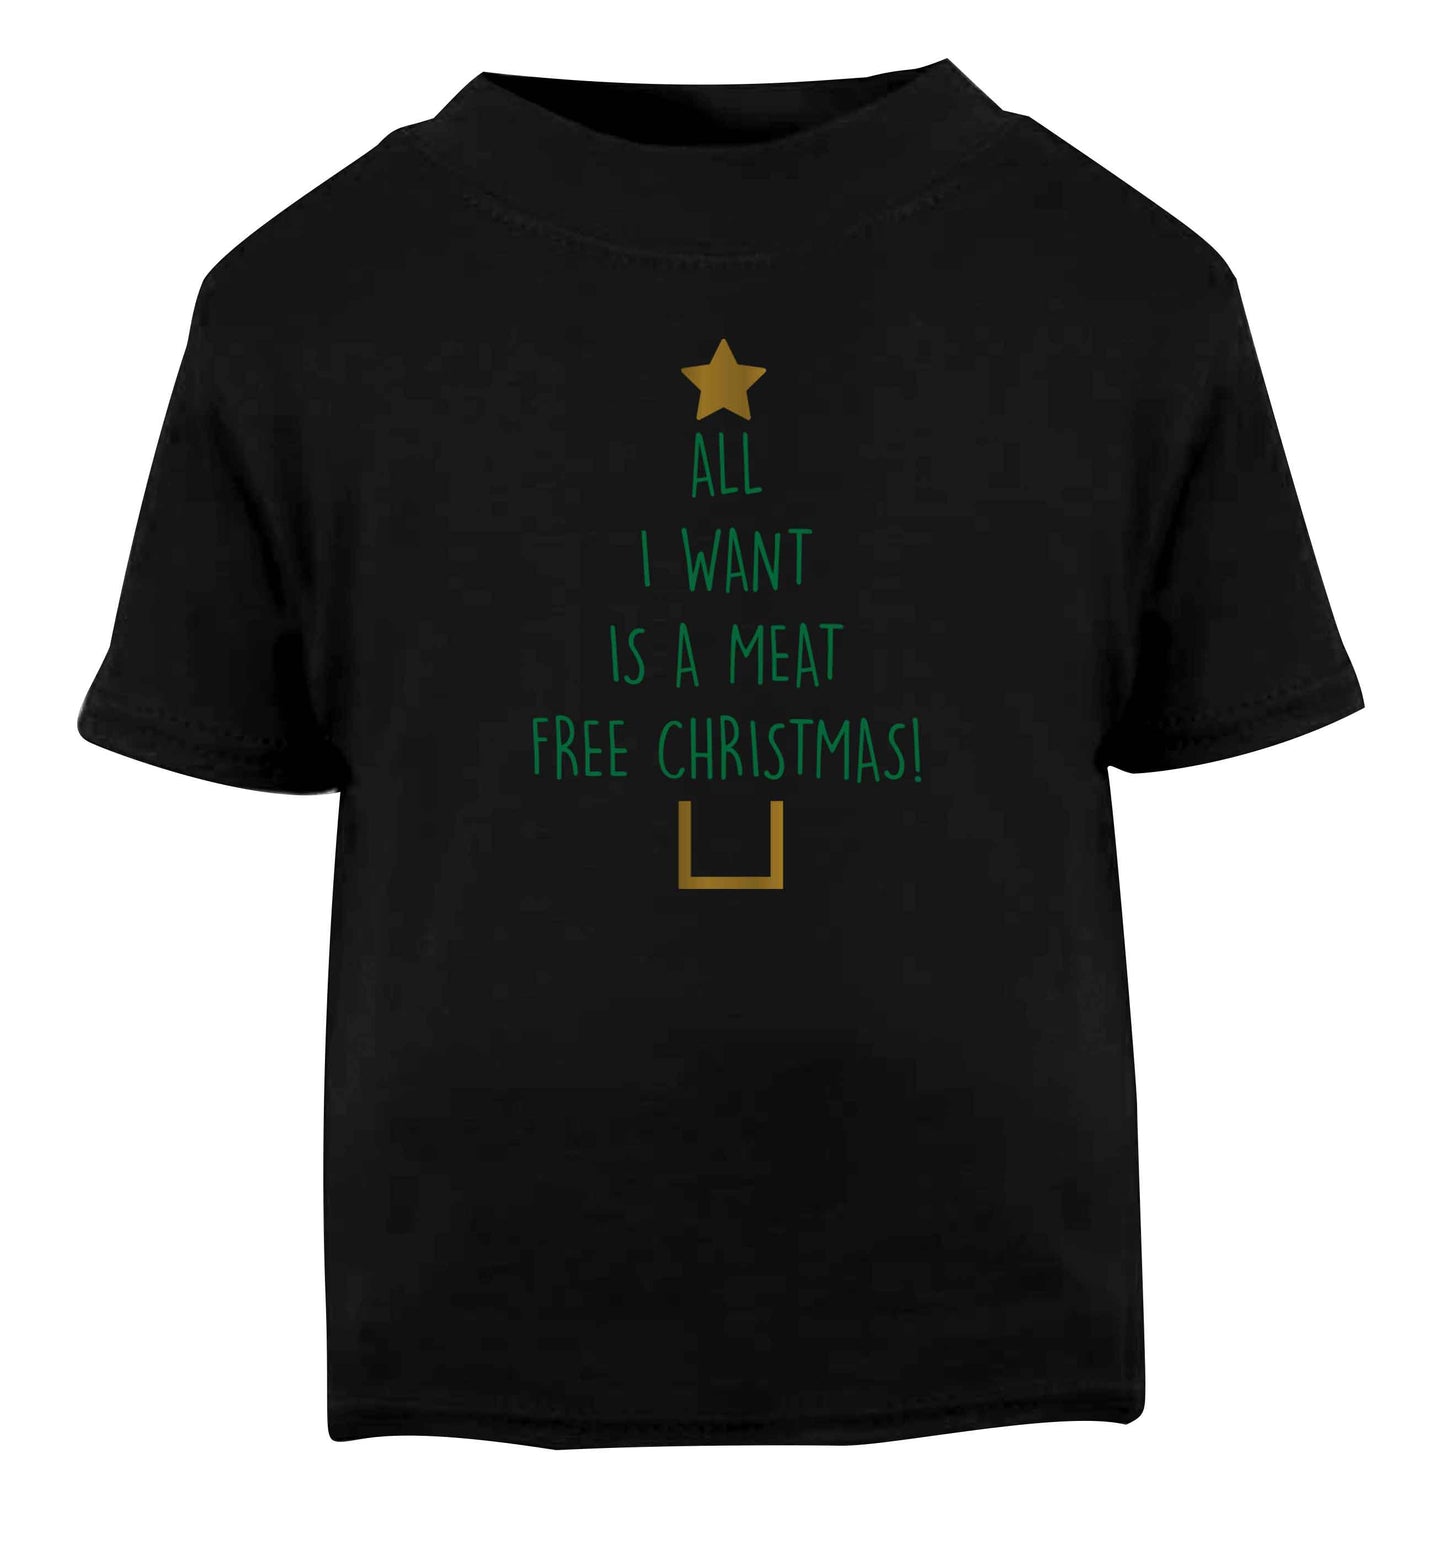 All I want is a meat free Christmas Black Baby Toddler Tshirt 2 years